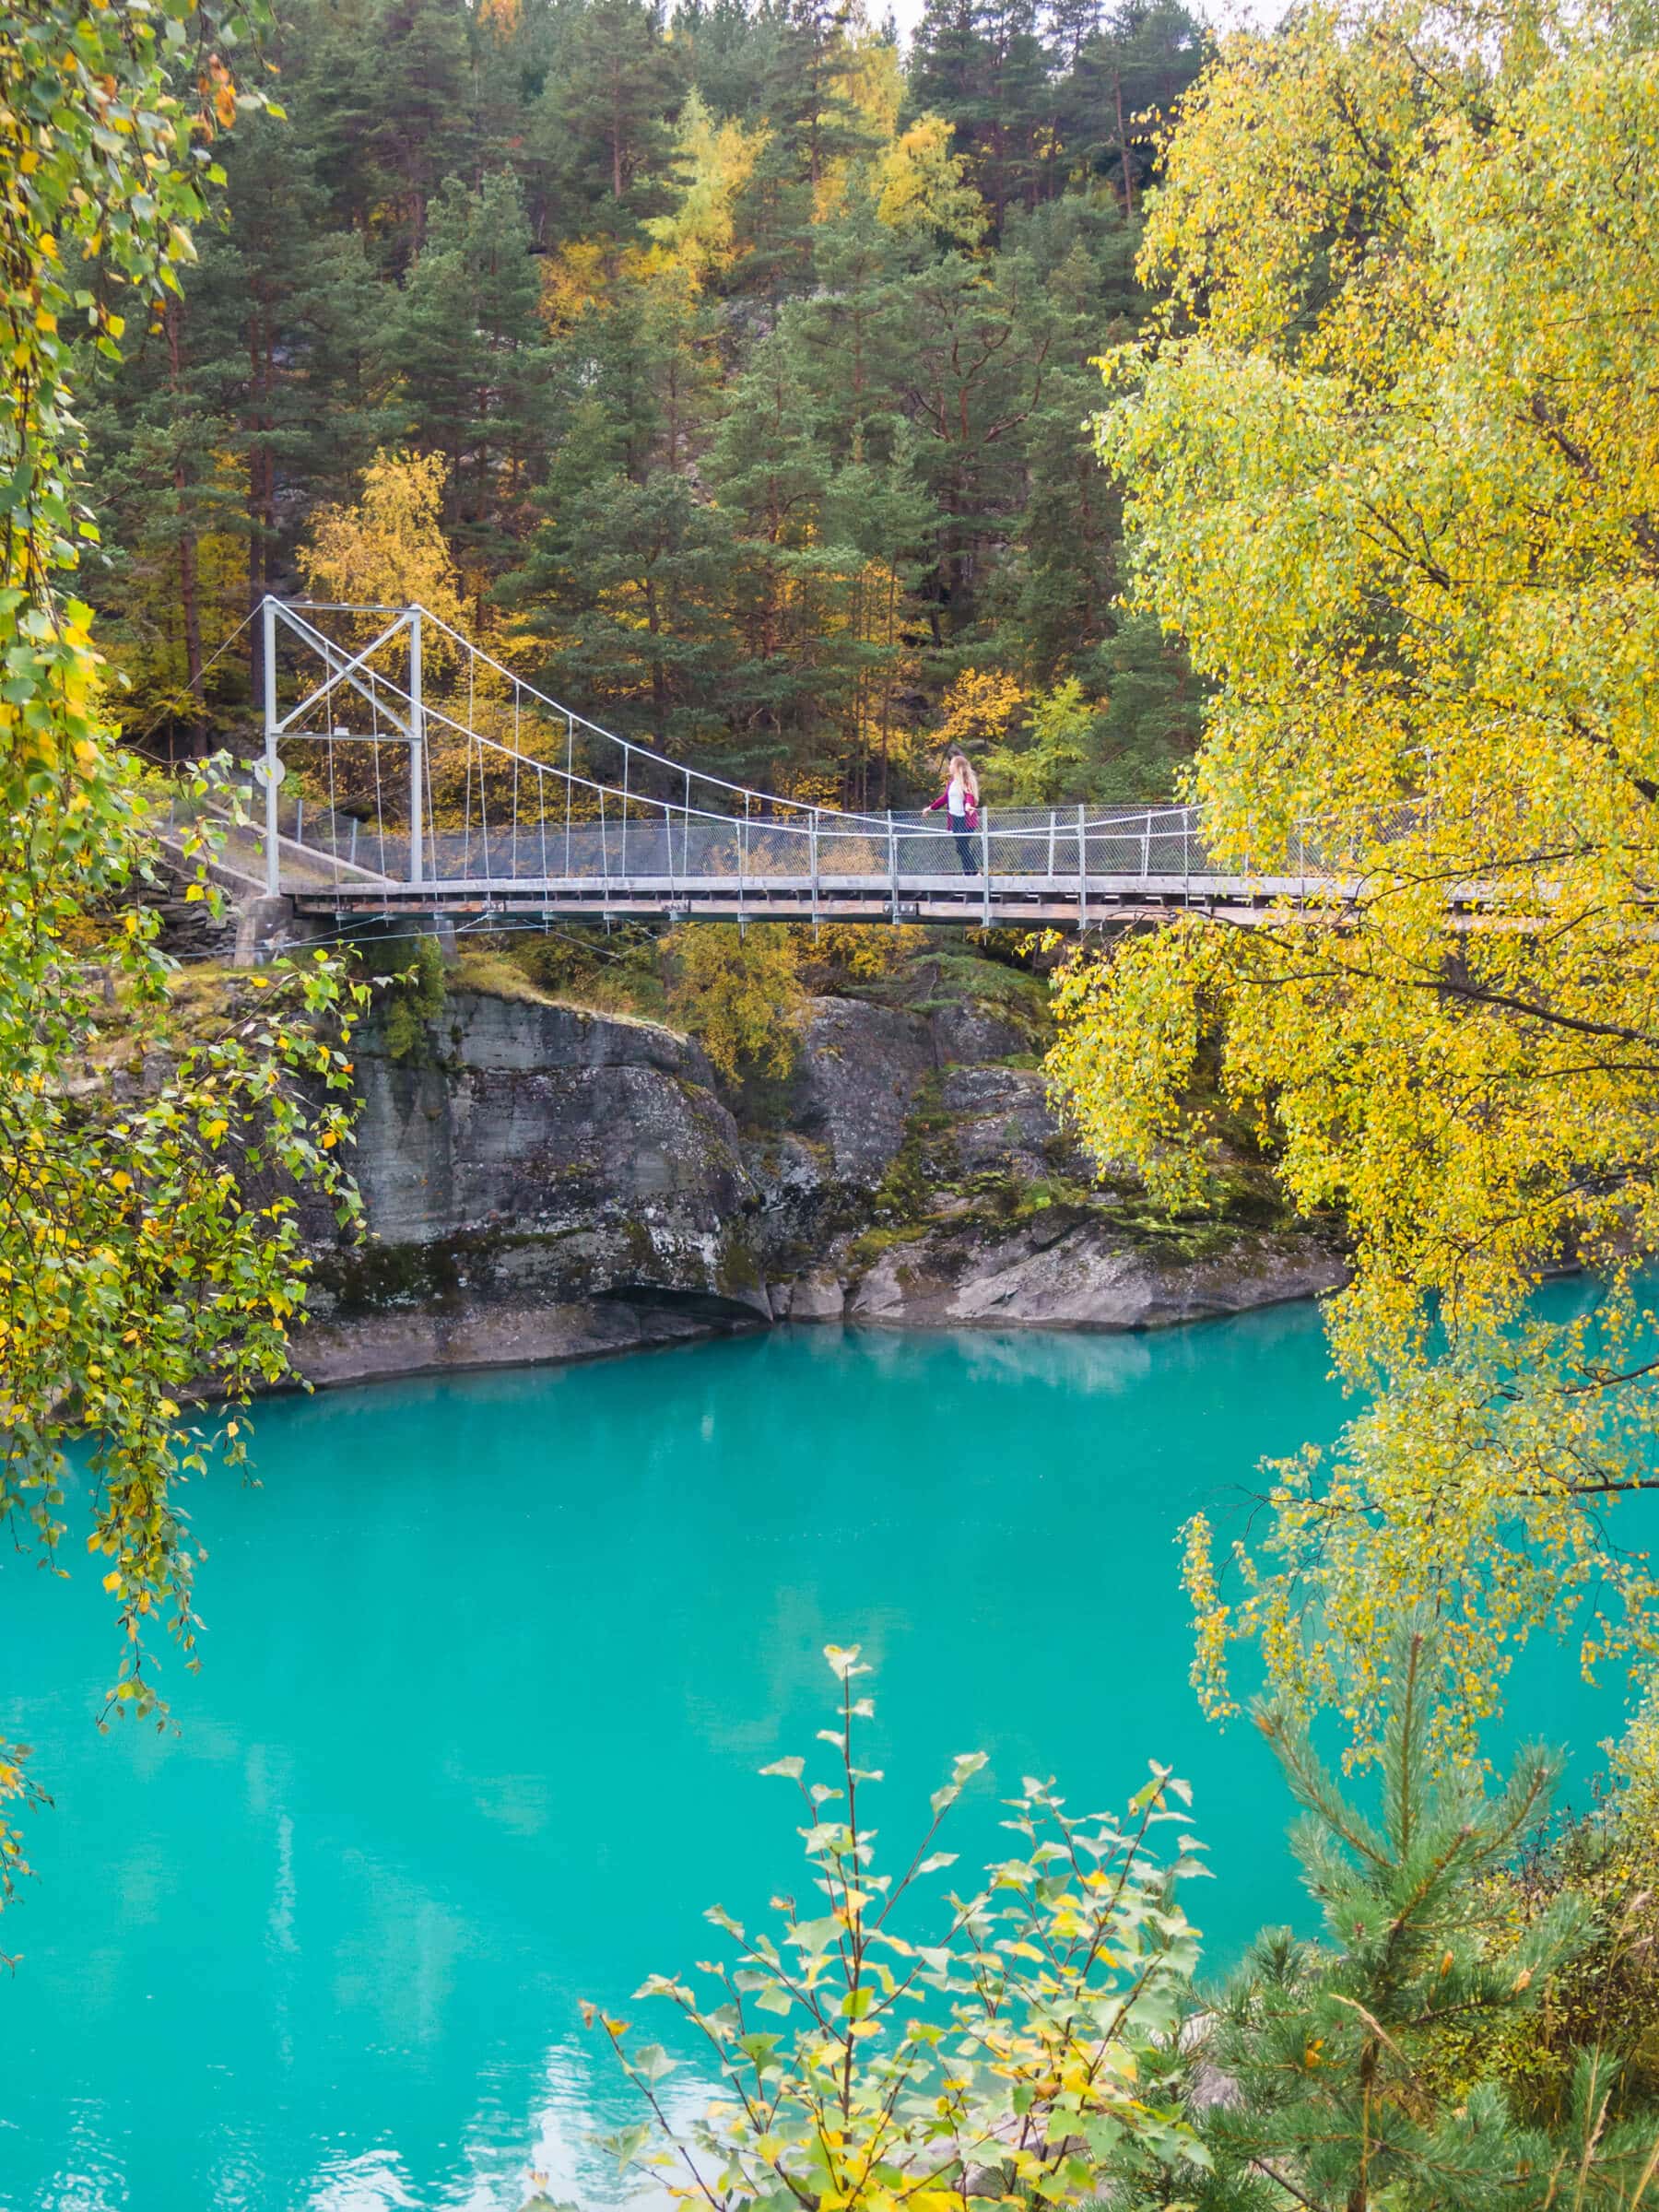 Gorgeous turquoise Finna river - Top things to do in Norway #bucketlist #norway #travelinspo #innlandet